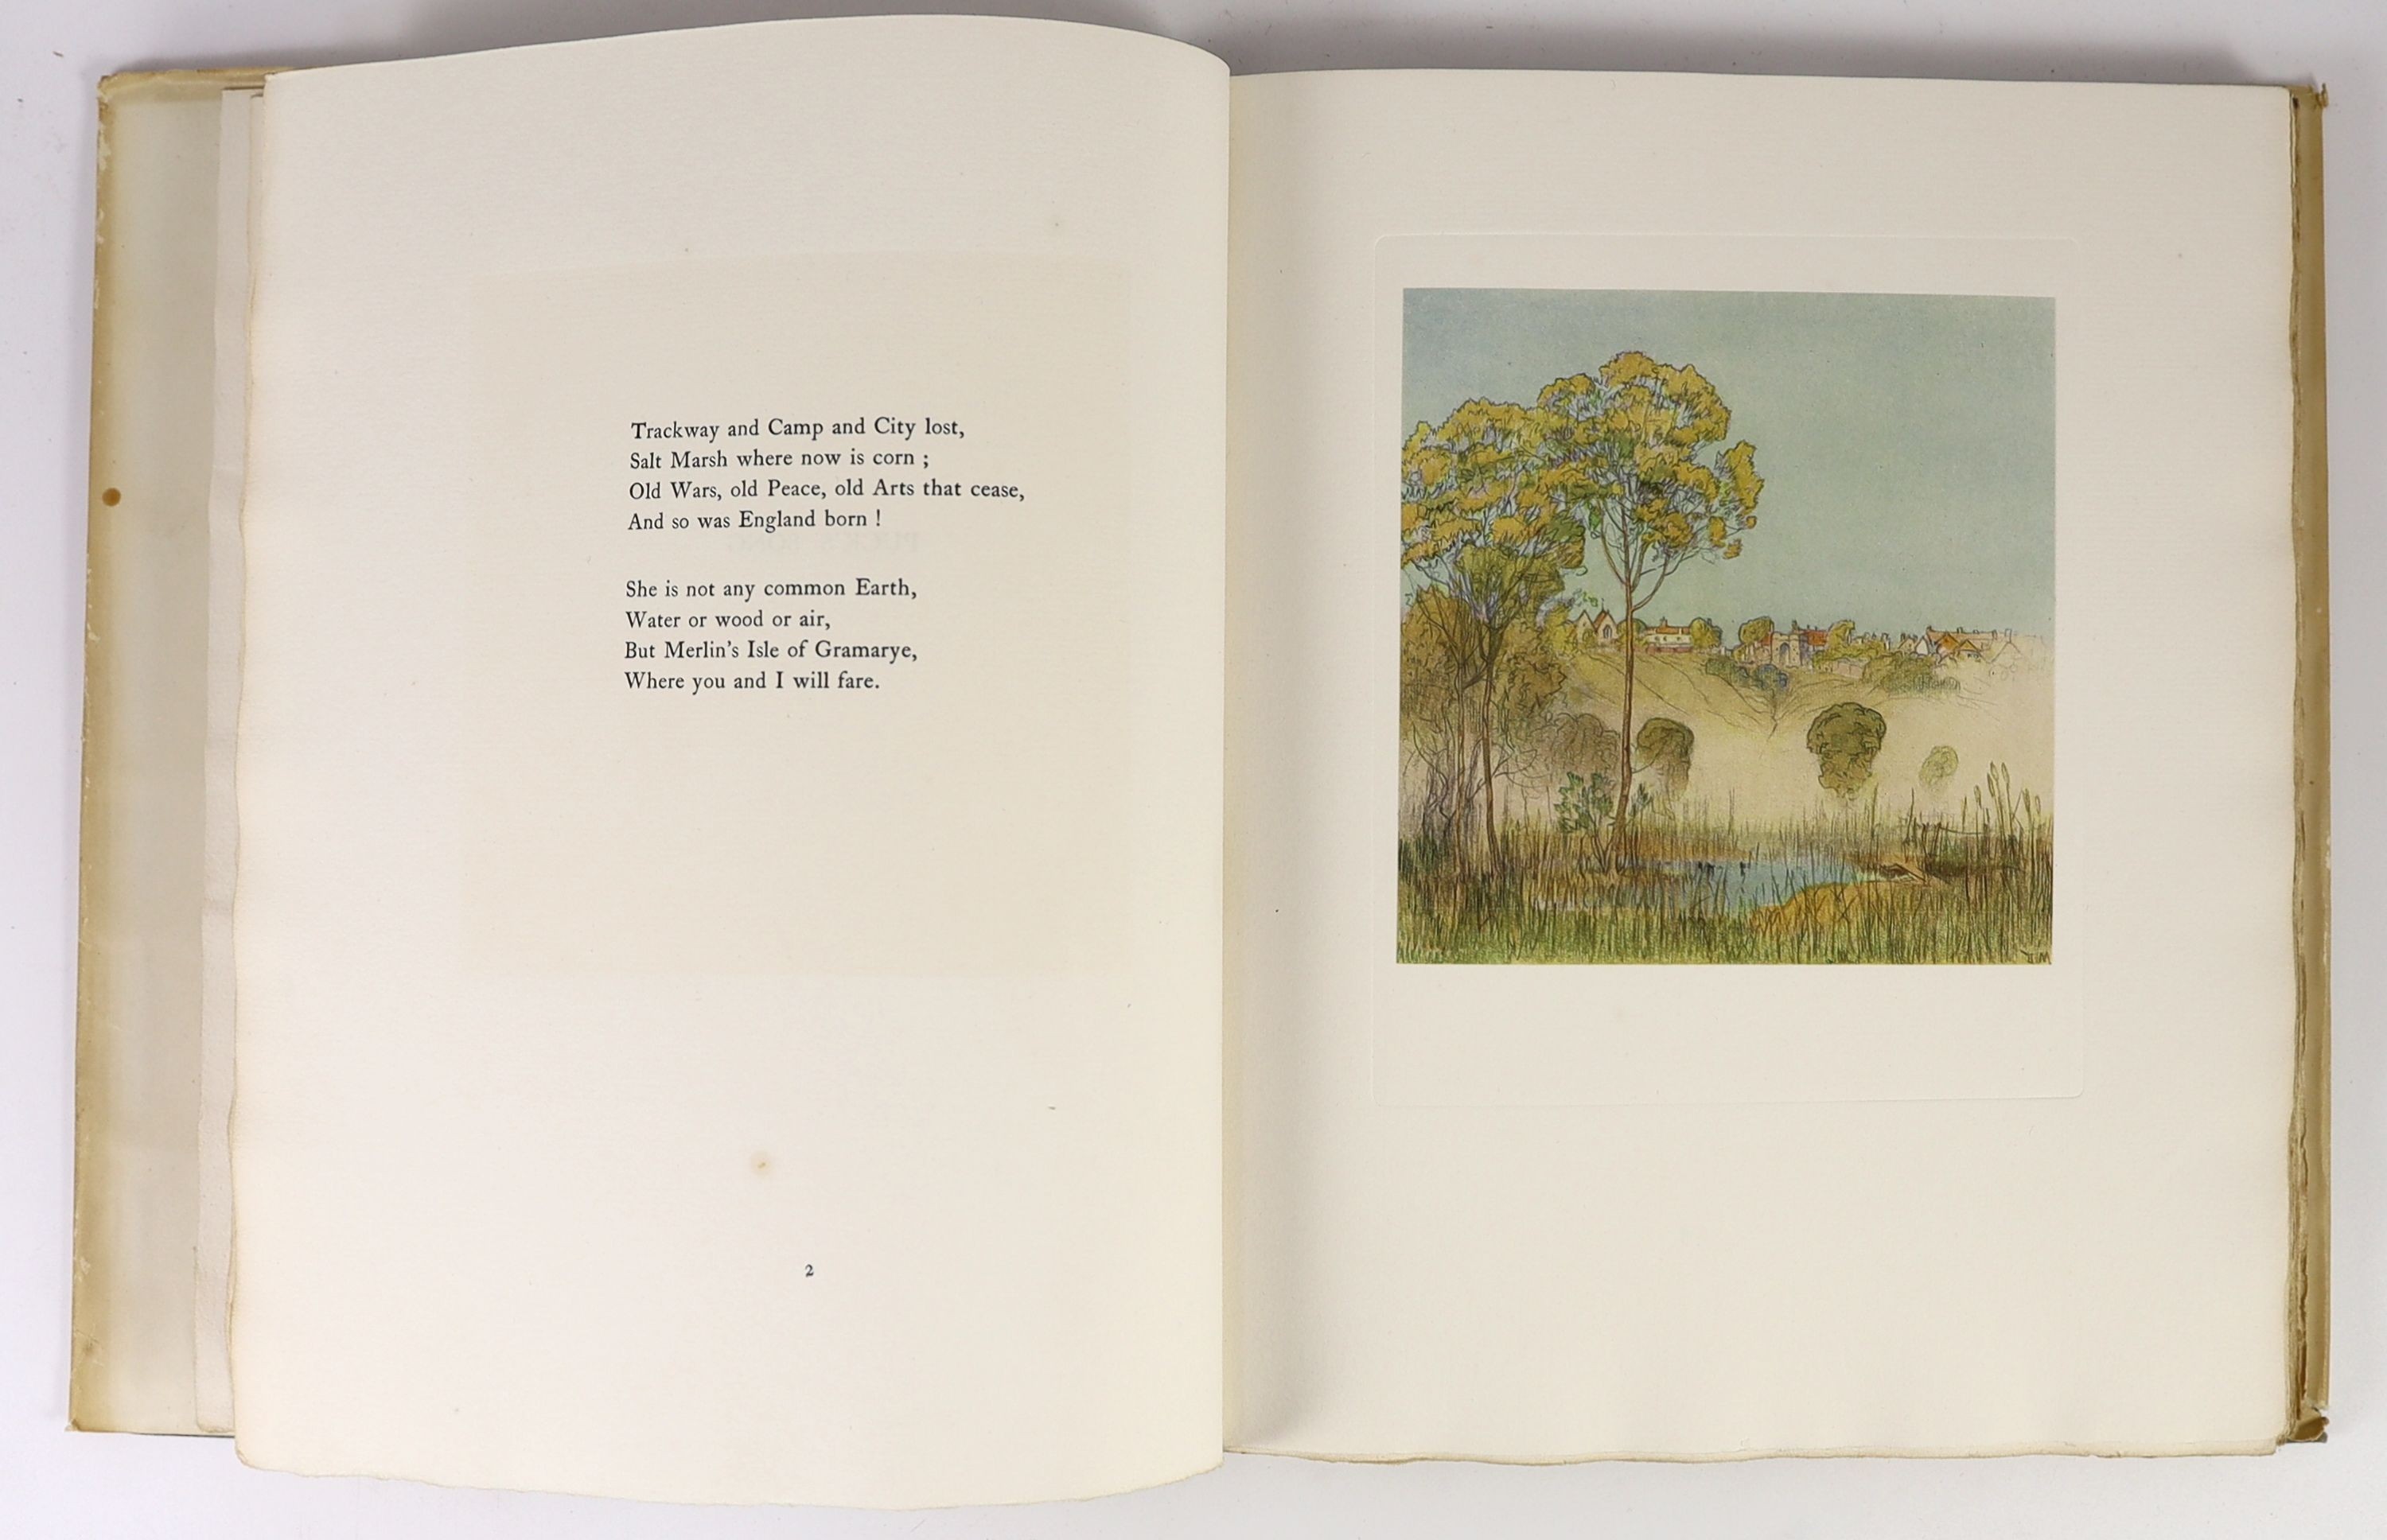 Kipling, Rudyard - Sea and Sussex, one of 500 signed by the author, illustrated with 24 mounted colour plates by Donald Maxwell, 4to, quarter vellum, in d/j, Macmillan and Co., Ltd, London, 1926, in slip case.